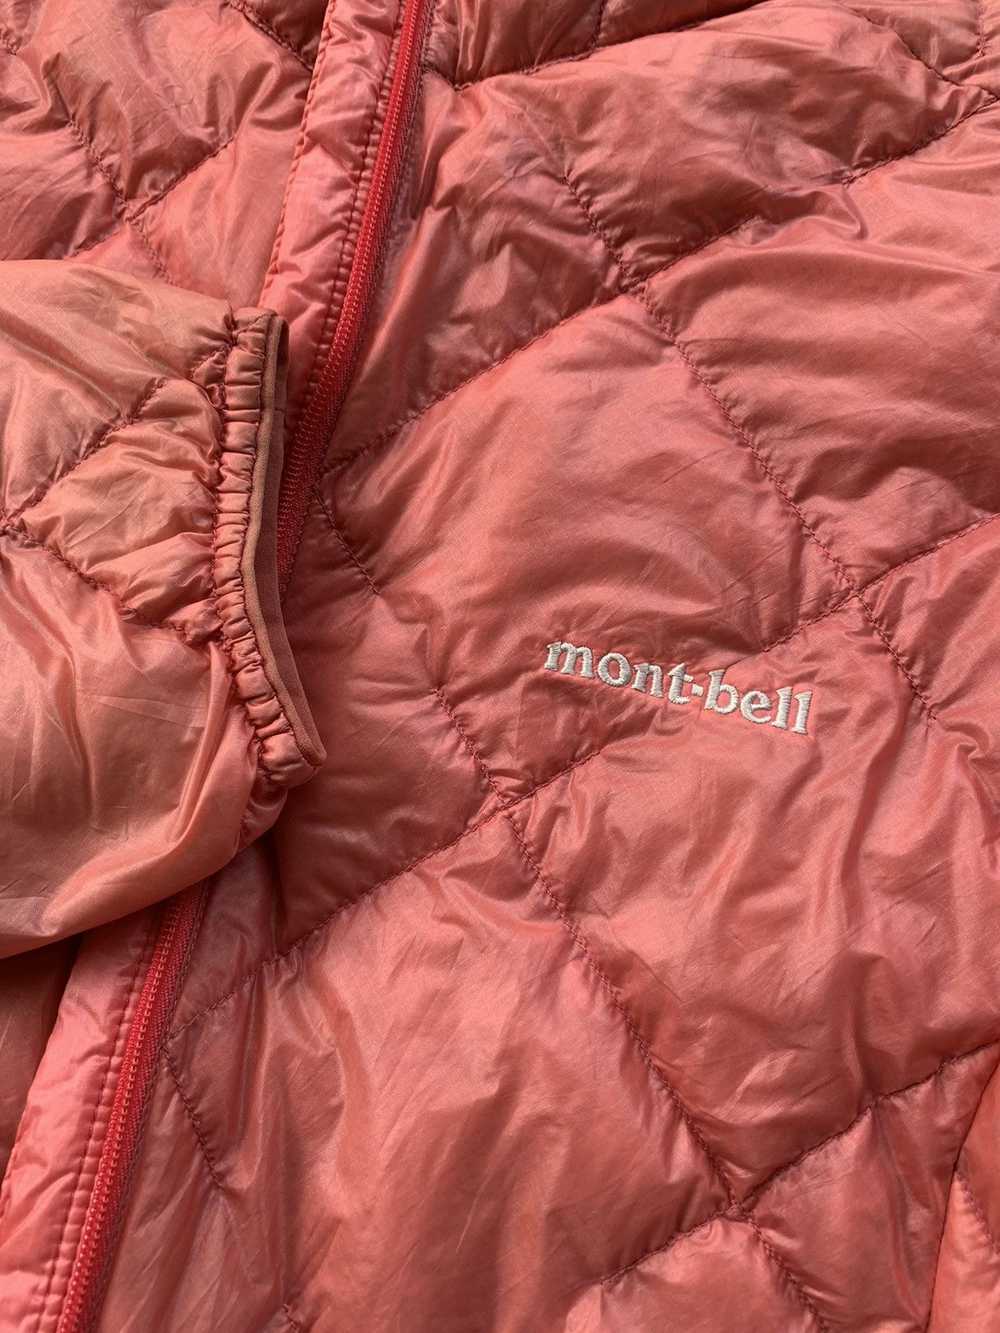 Montbell 2000s Diamond Lightweight Down Jacket - image 9